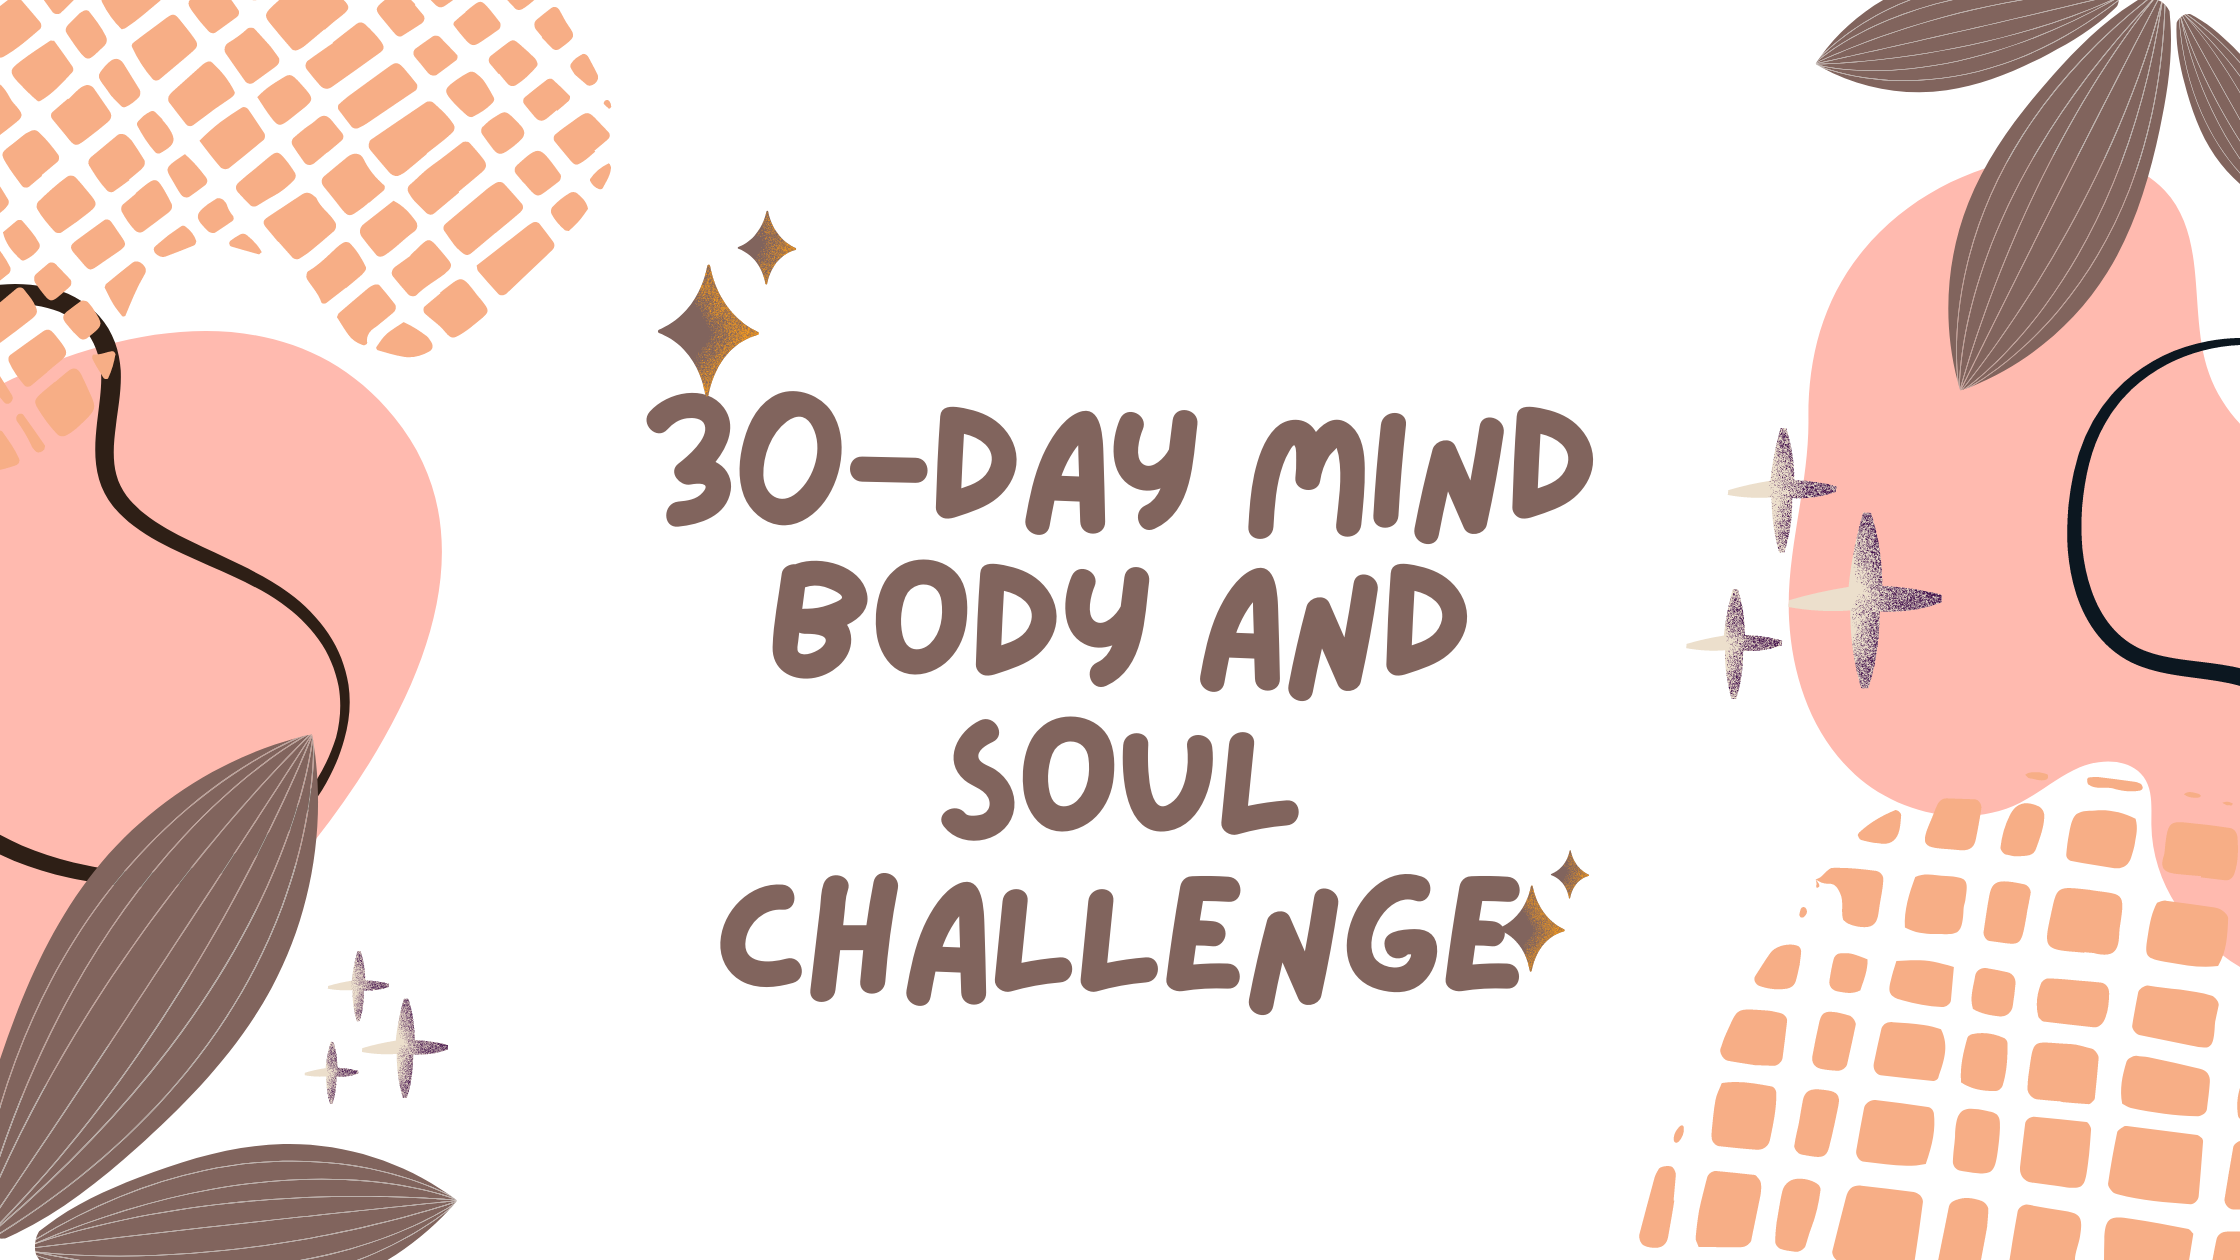 30-day mind body and soul challenge